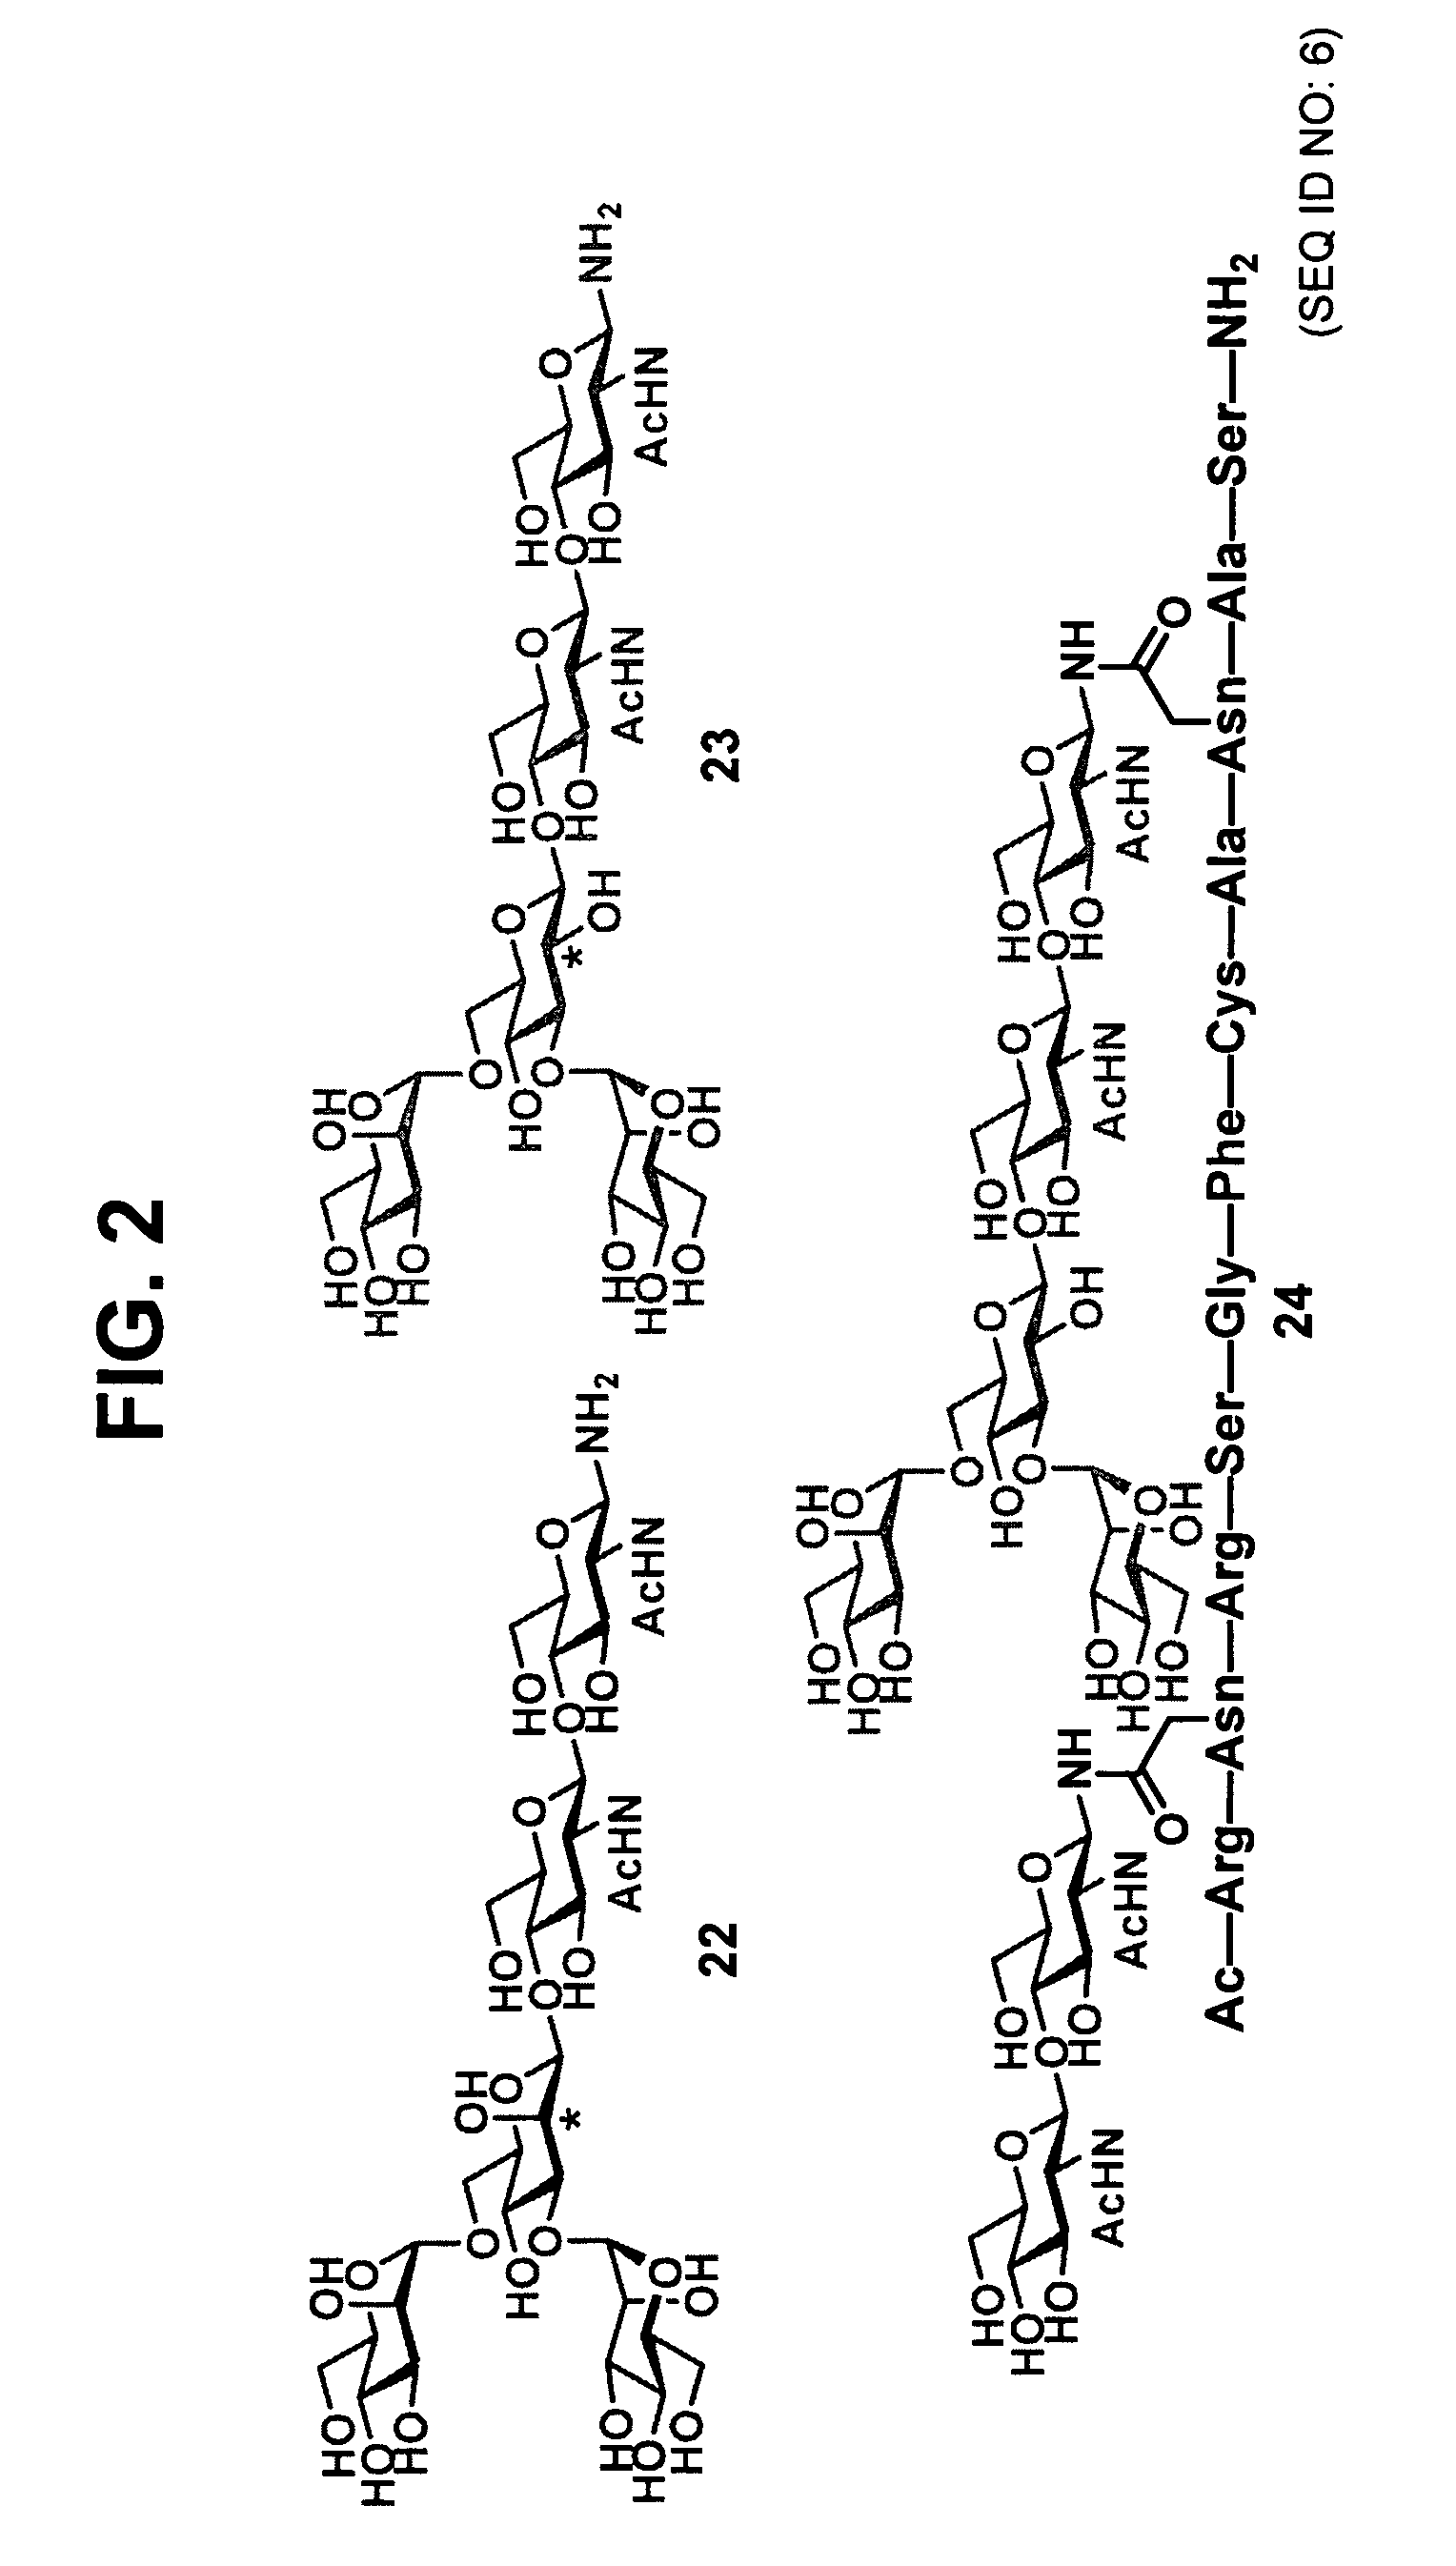 Method for preparing polyfunctionalized peptides and/or proteins via native chemical ligation